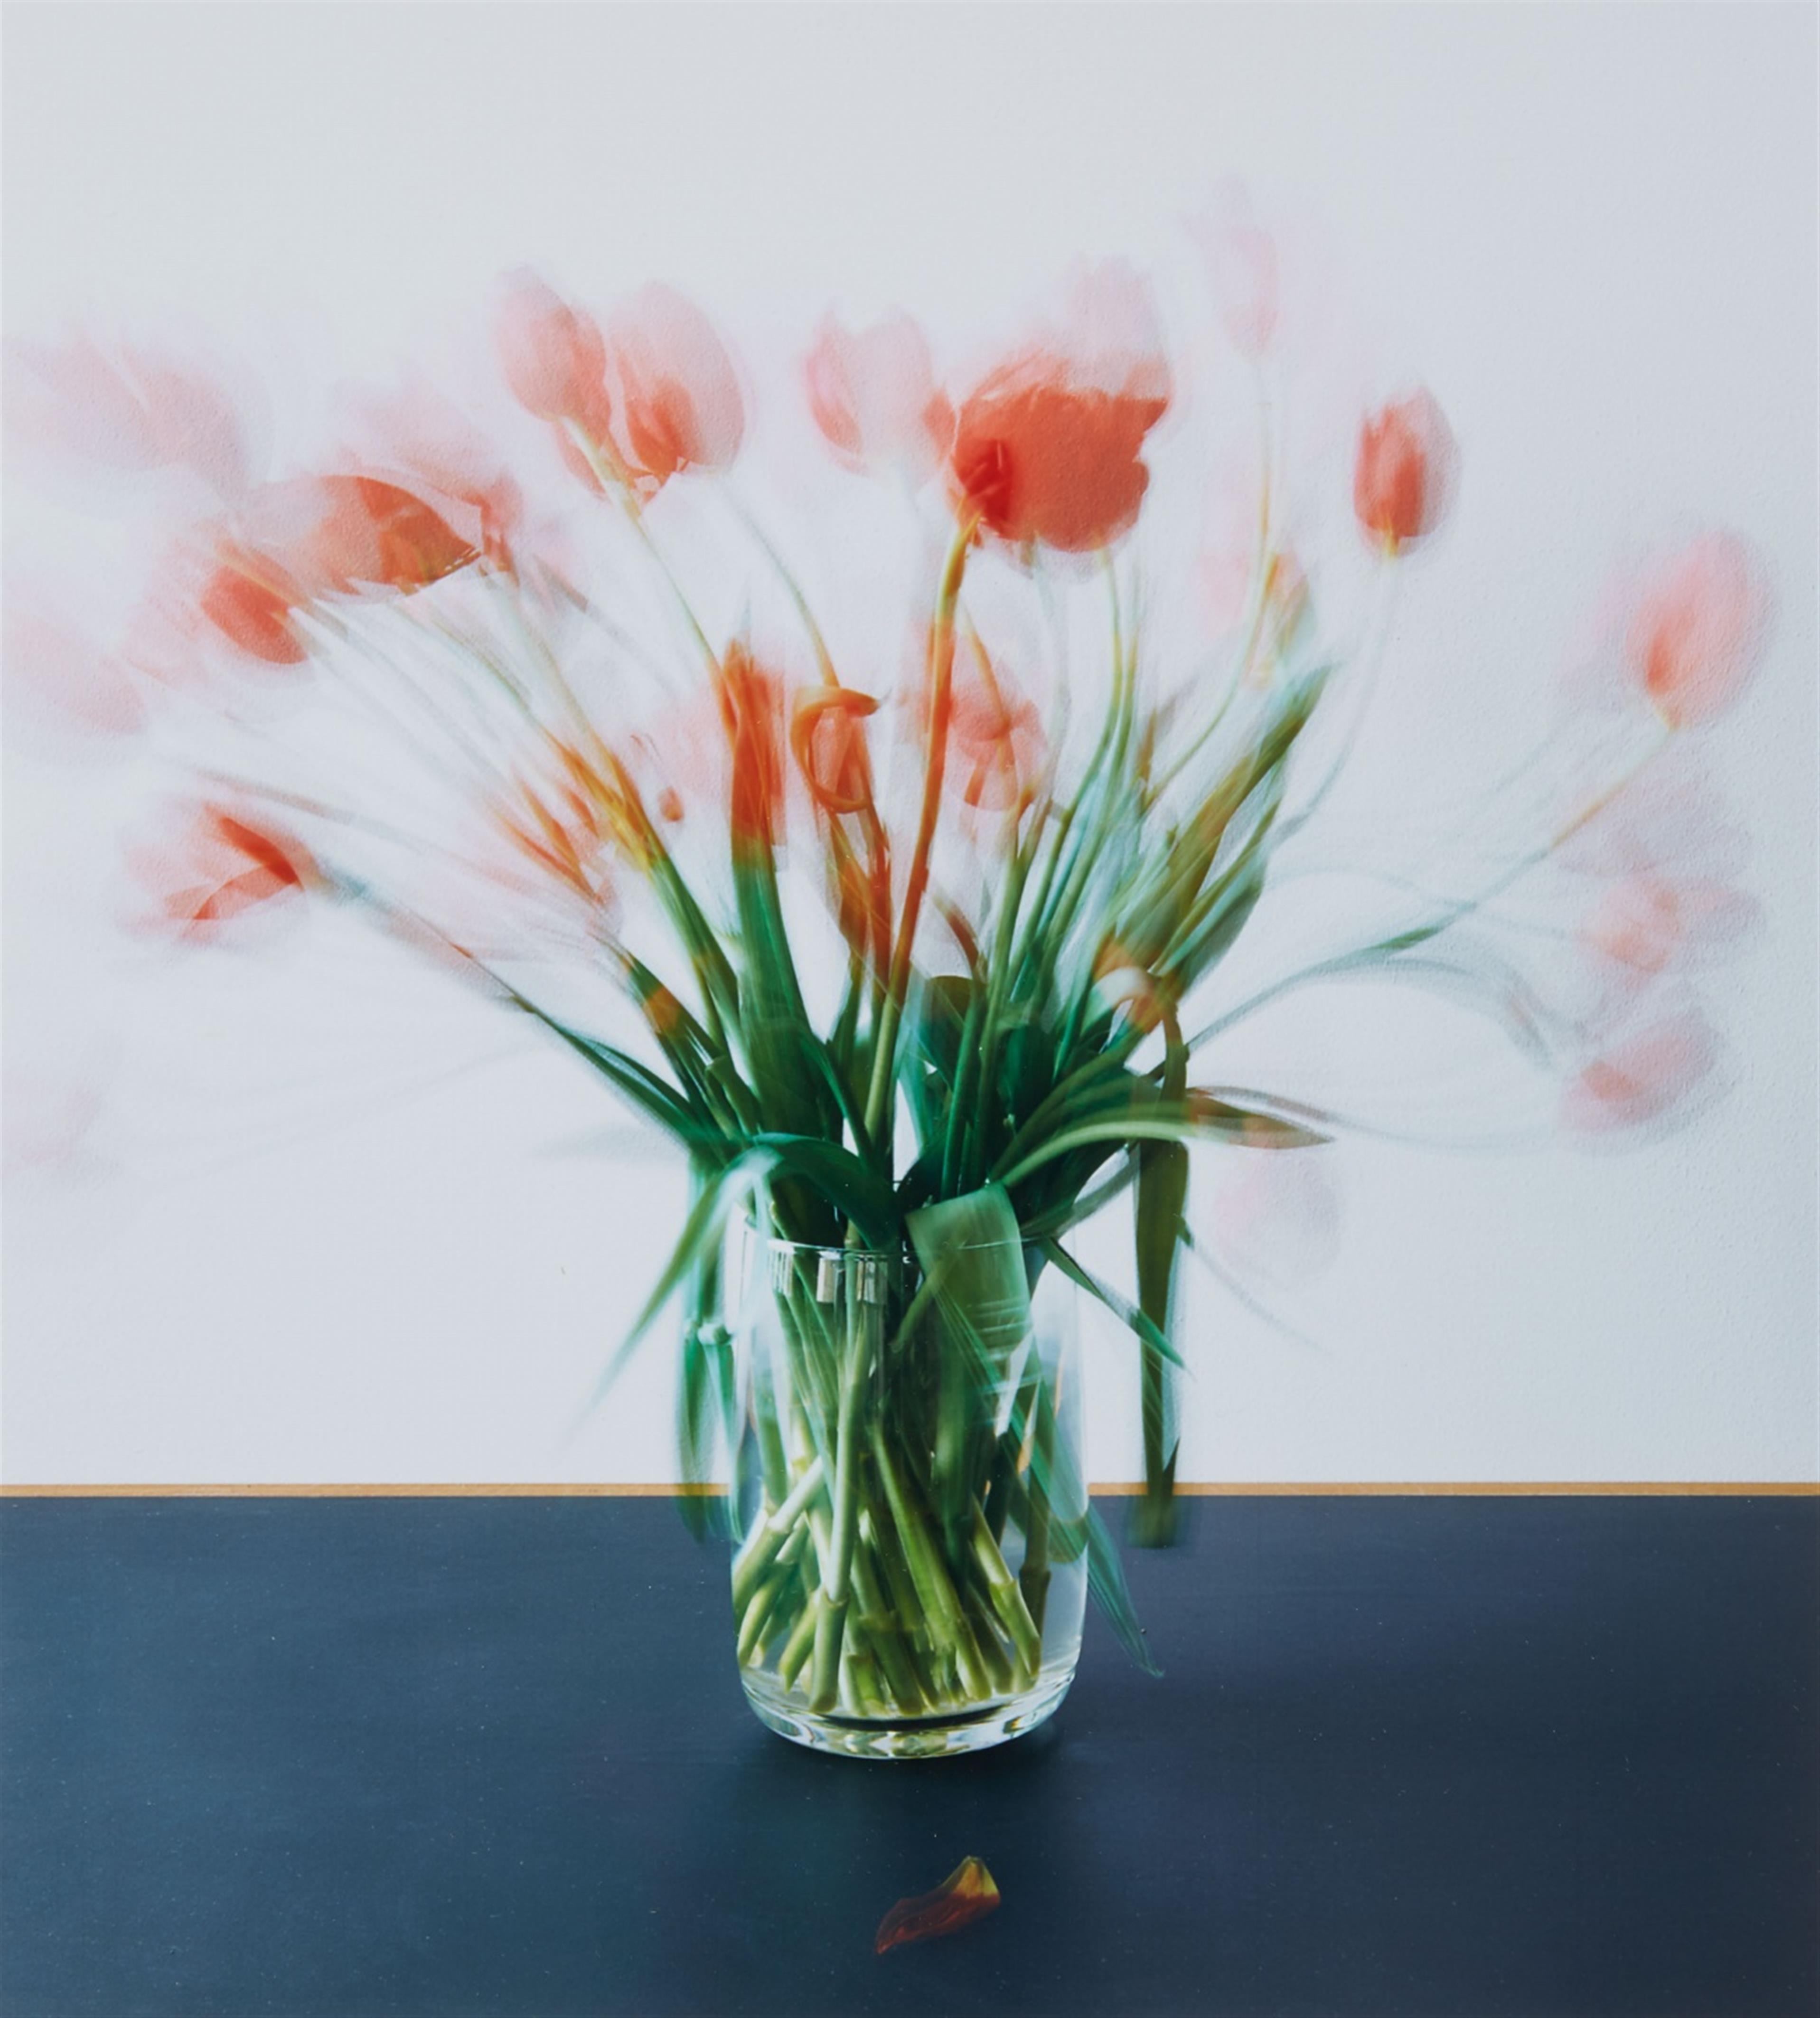 Michael Wesely - 10.2. - 20.20.2007 - image-1